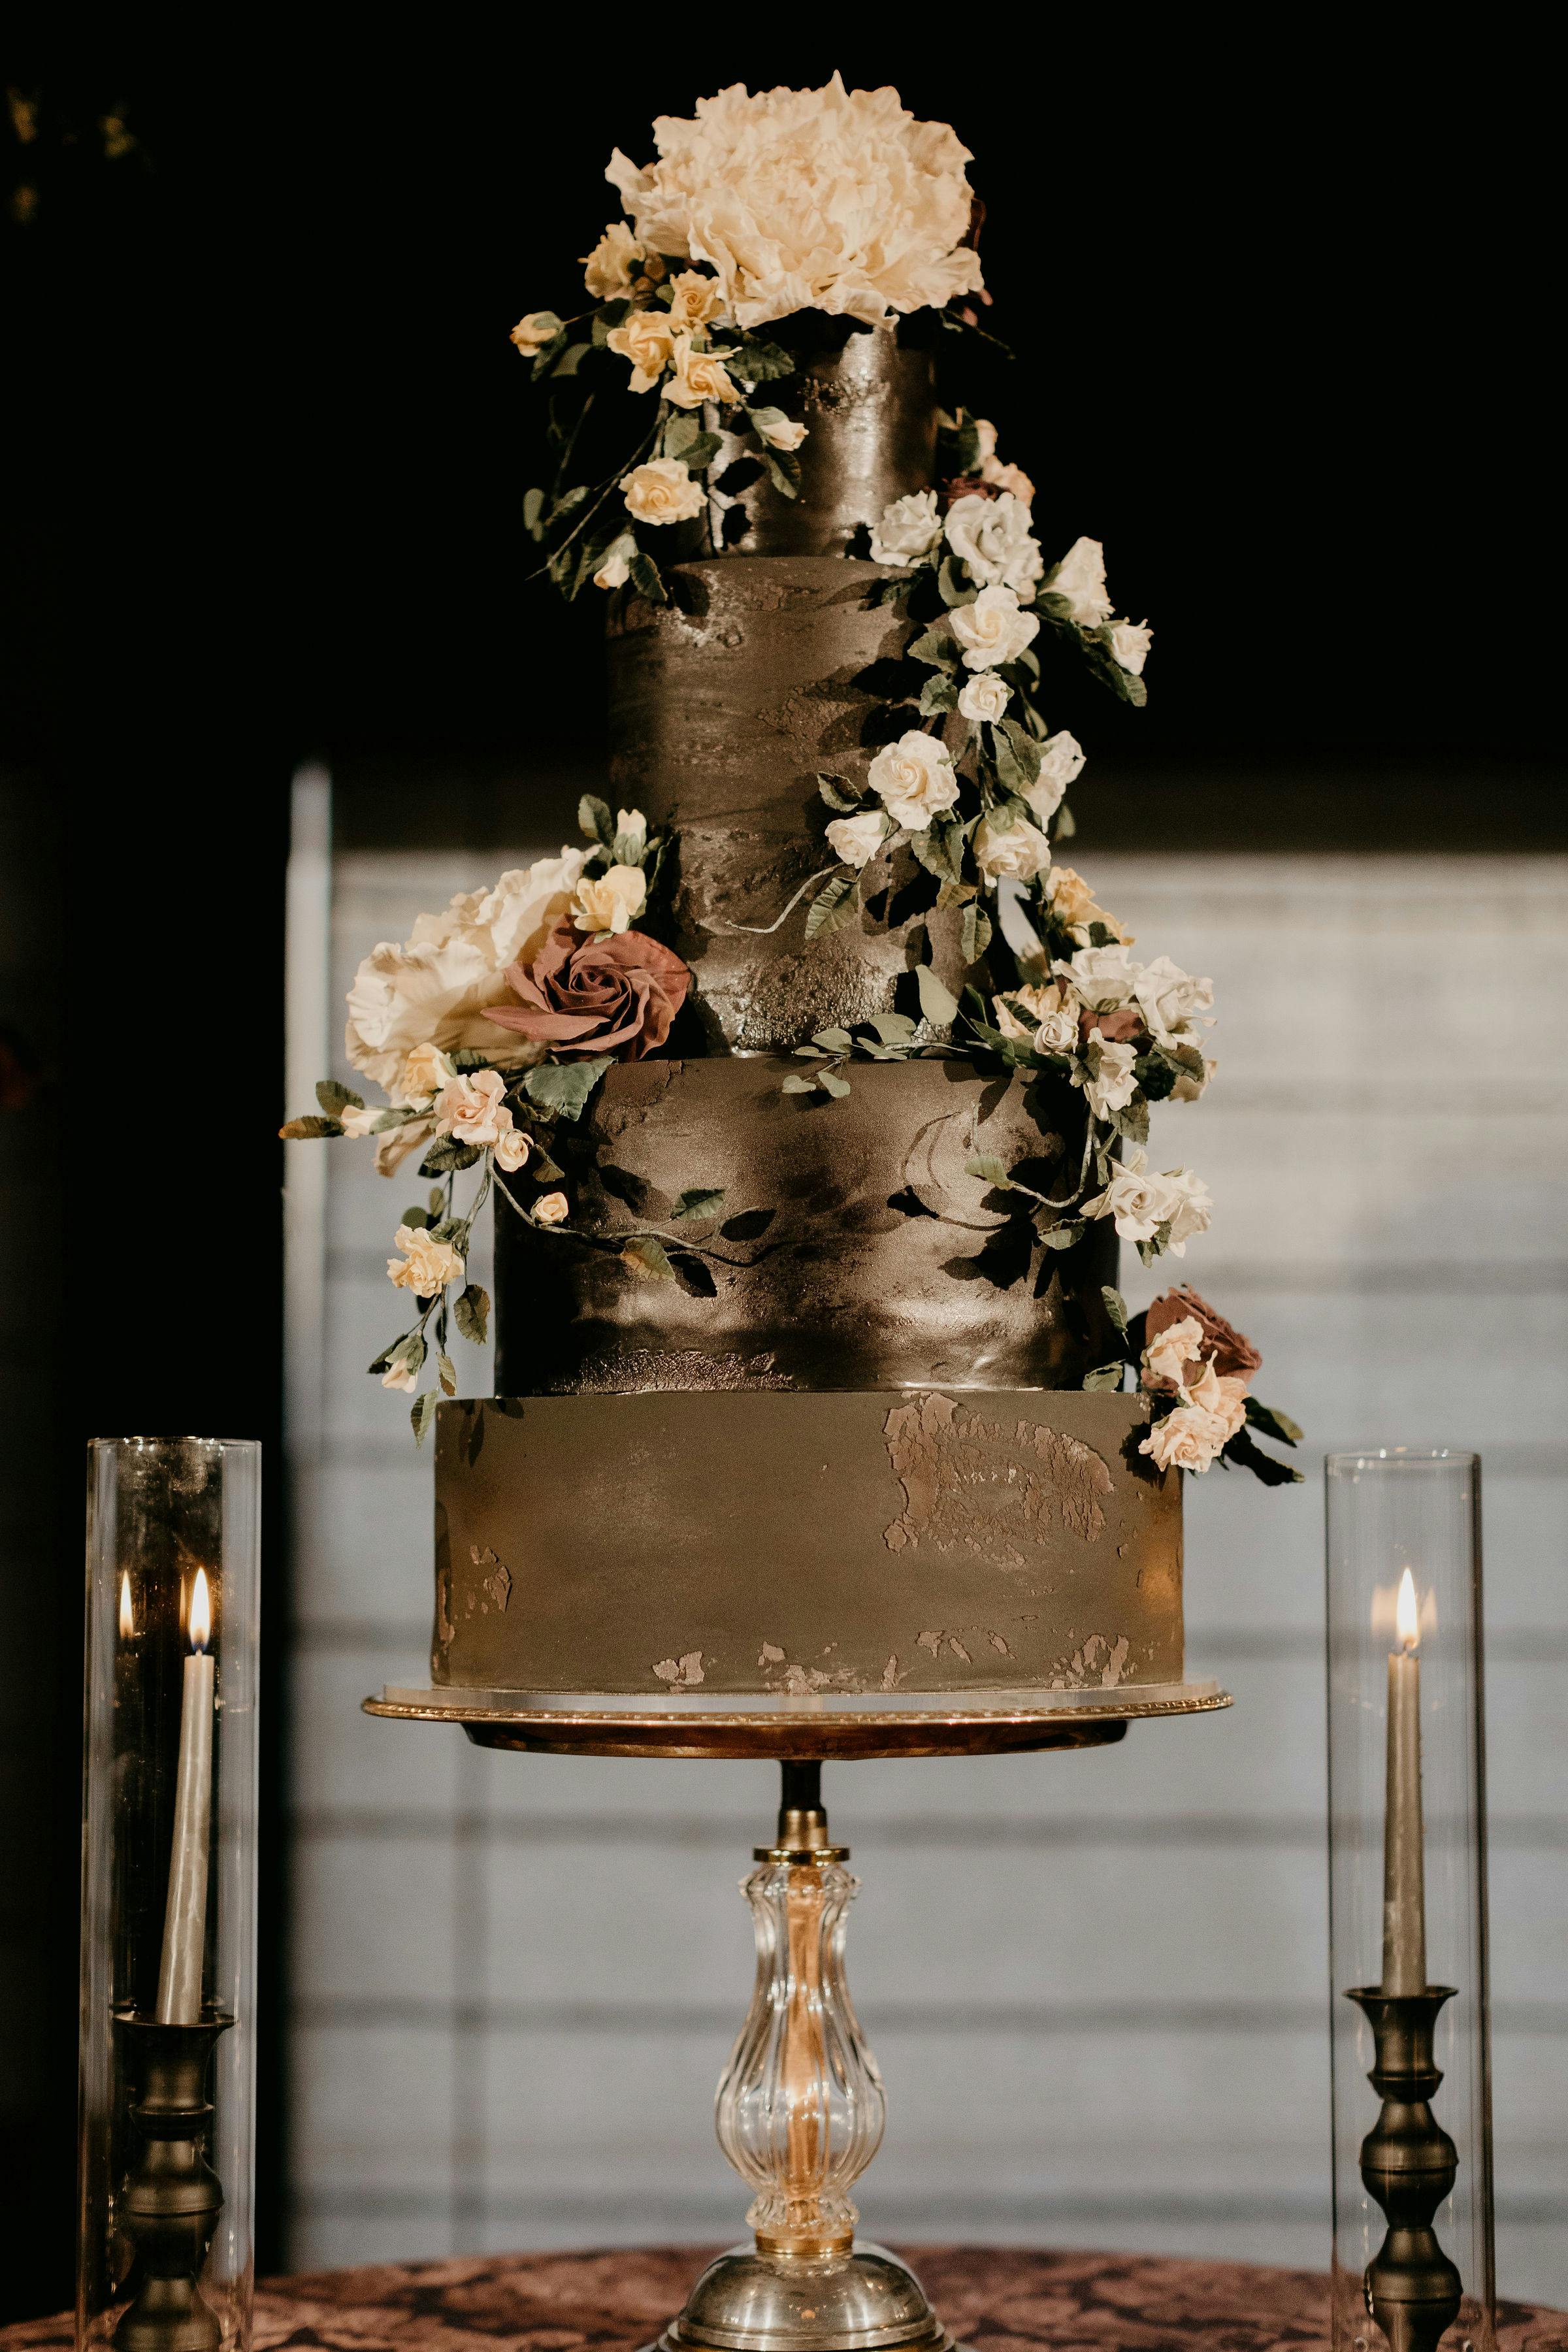 Black Wedding Cake at Luxurious Enchanting Wedding at The Asian Art Museum in San Francisco, CA | PartySlate